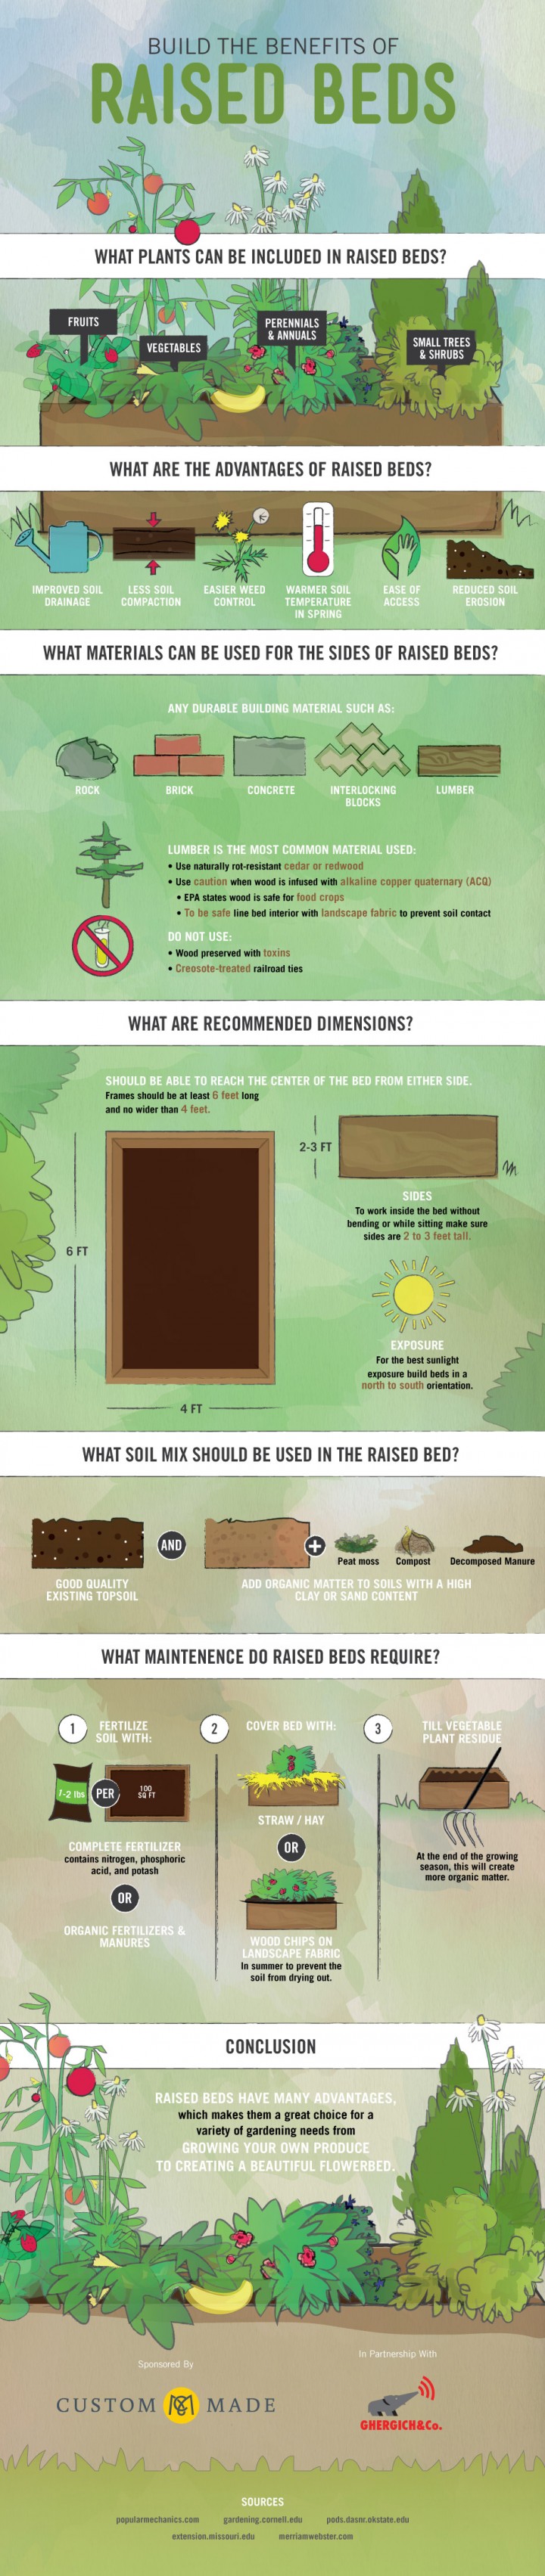 The Benefits of Gardening in Raised Beds Infographic